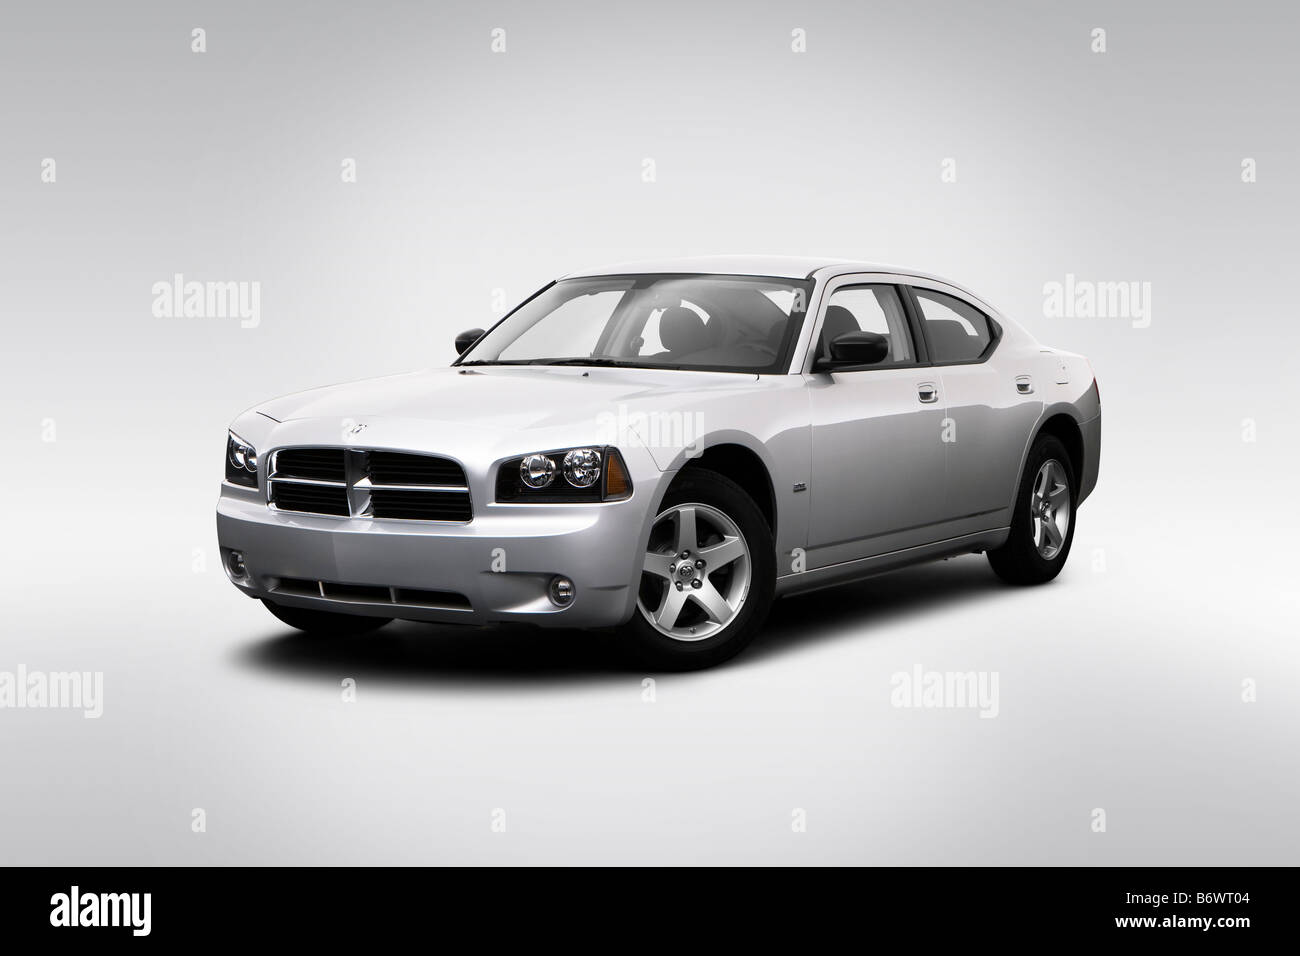 2009 Dodge Charger Sxt In Silver Front Angle View Stock Photo Alamy